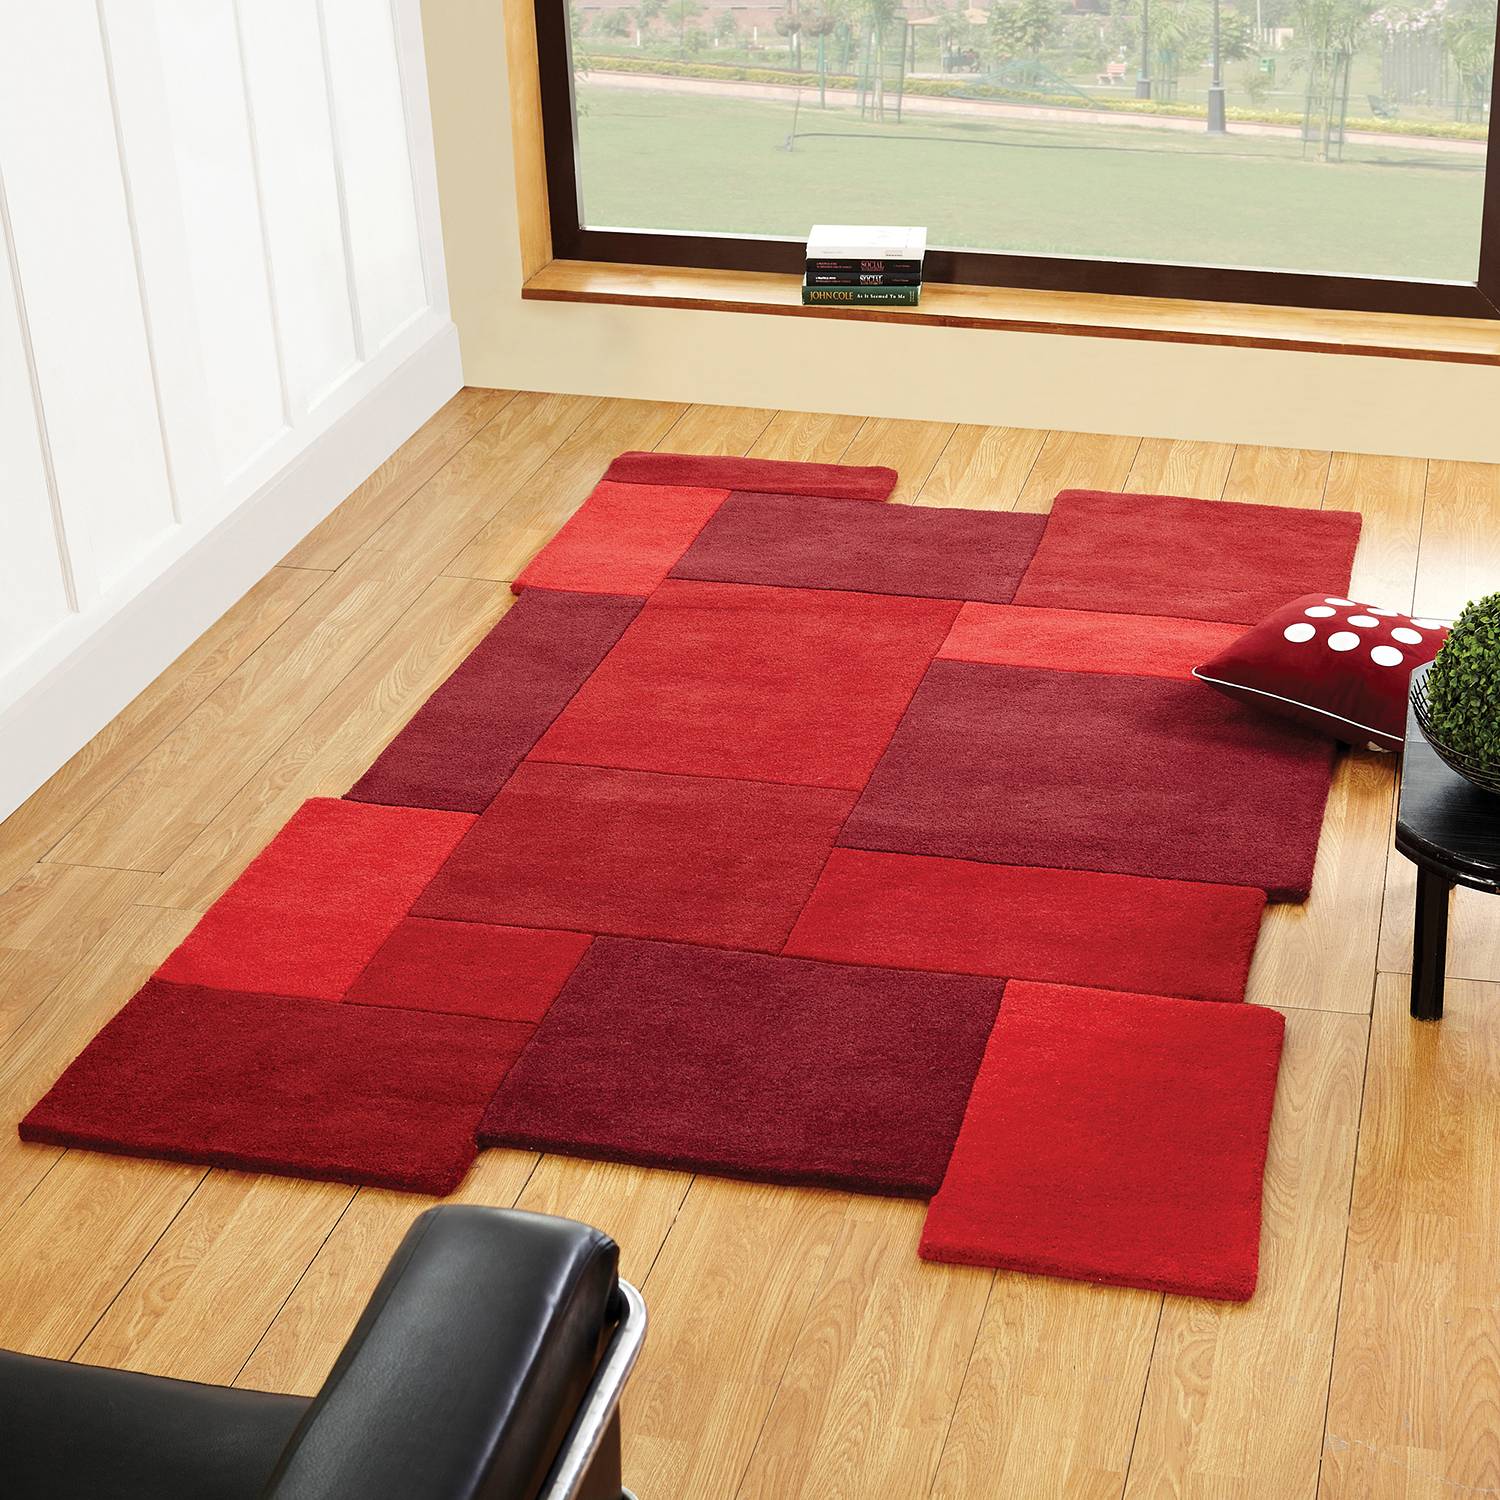 Image of Tapis en laine Collage 000000001000229978